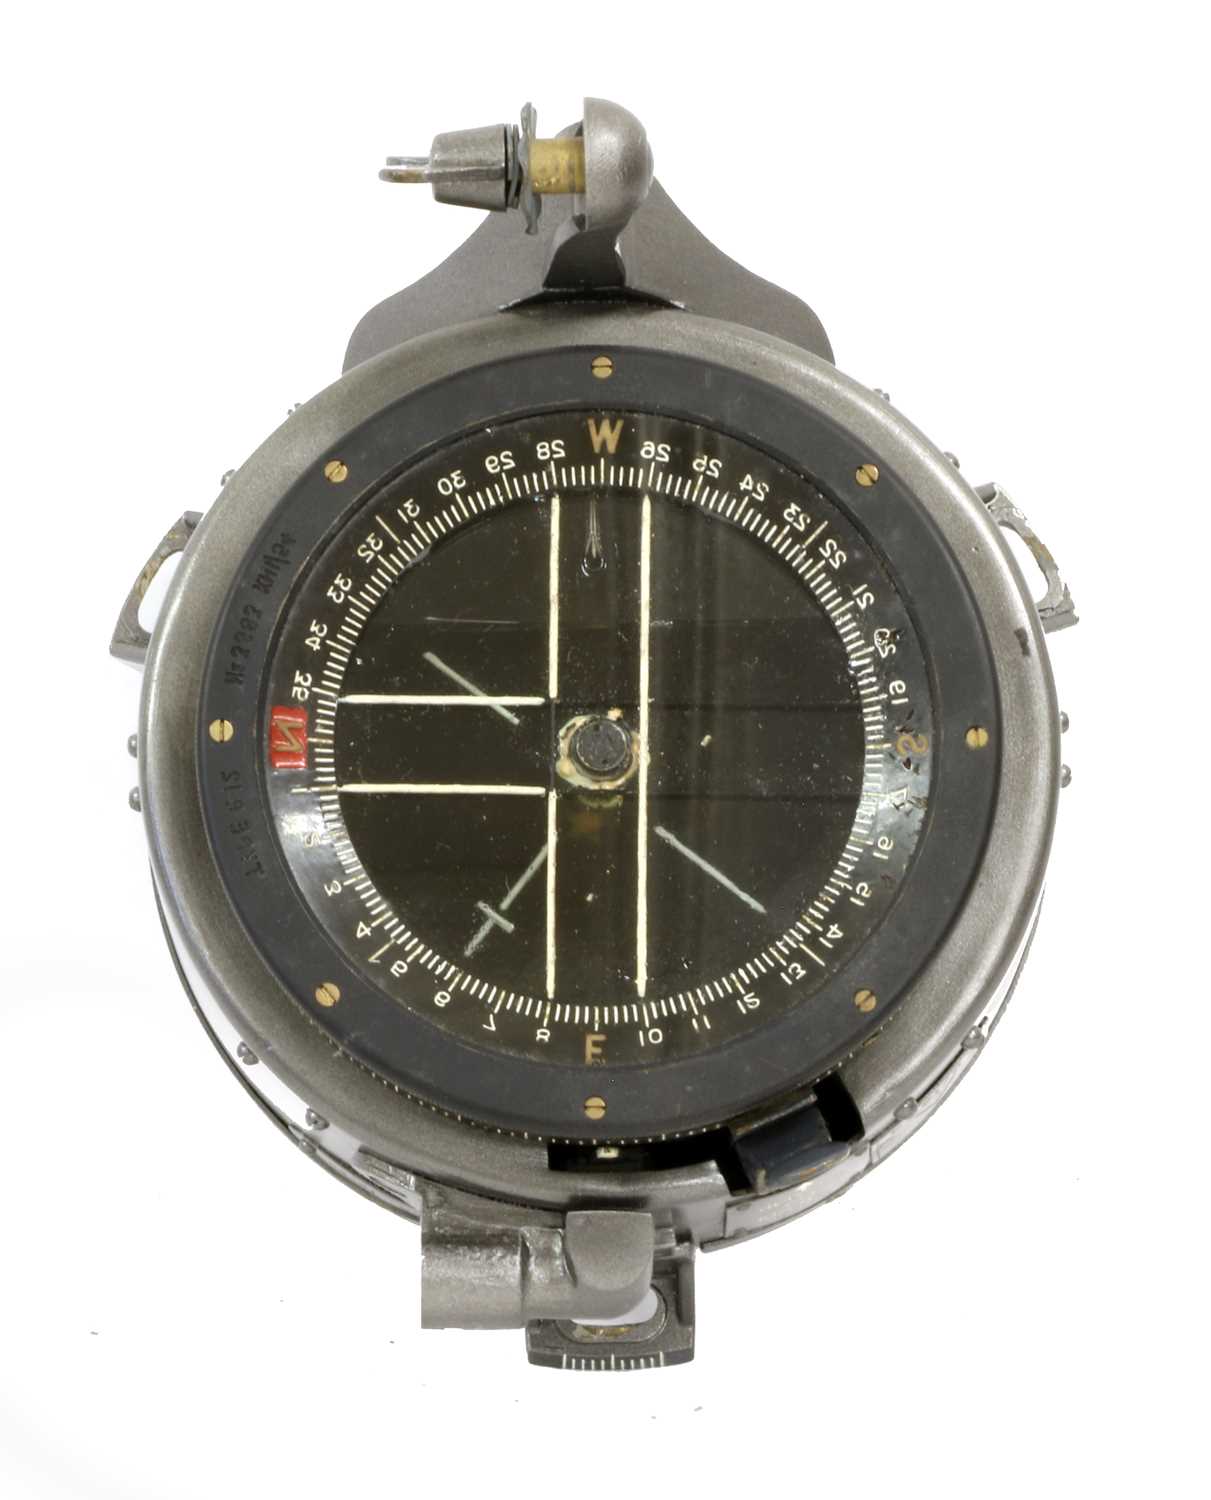 Three Second World War Aviation Compasses: - a Type P.12 Compass, No.3383 KHI/54 AFT, with broad - Image 2 of 4